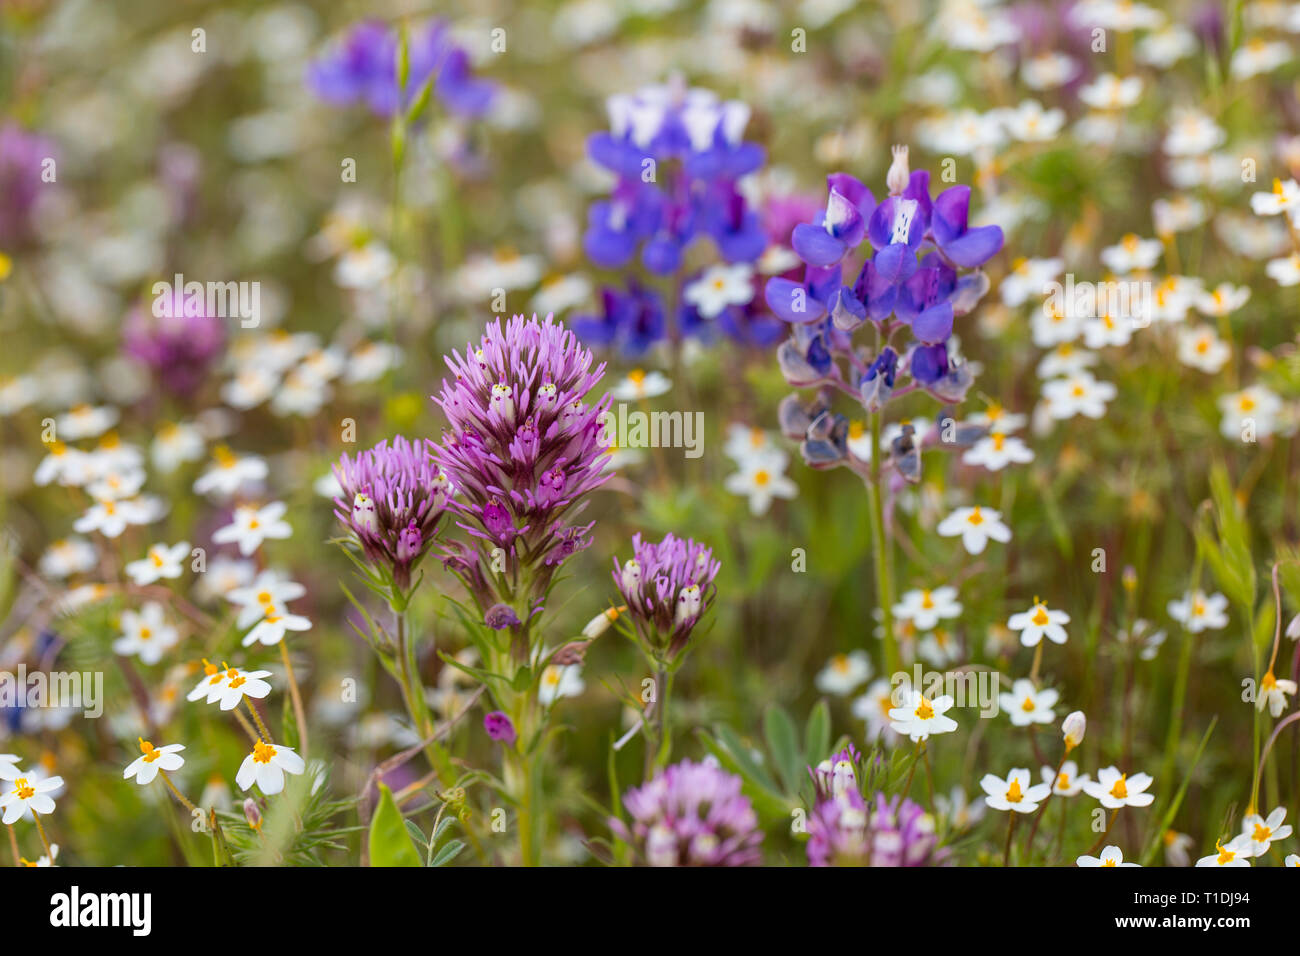 Red Owl's Clover, Douglas' Lupine, and other wildflowers at Van Hoosear Wildflower Preserve in Sonoma, CA Stock Photo